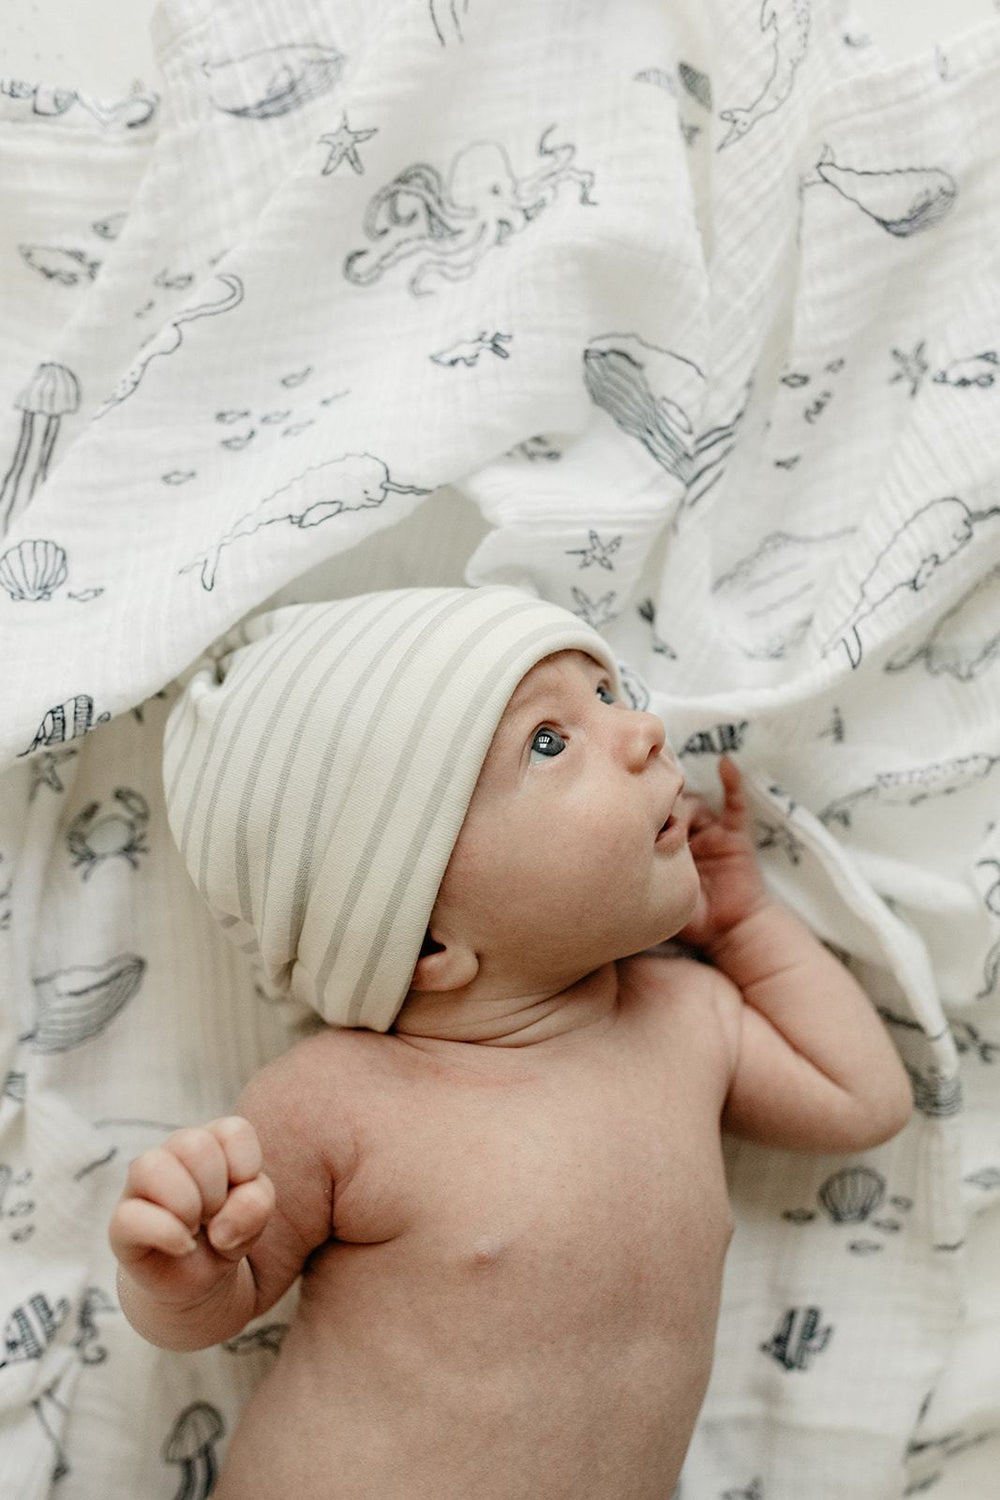 Baby lying on Pehr Marine Life Aquatic Organic Novelty Swaddles wearing Pehr Stripes Away Pebble Grey Organic Knot Hat. Organic cotton, hand printed. White with blue sea creatures pattern.